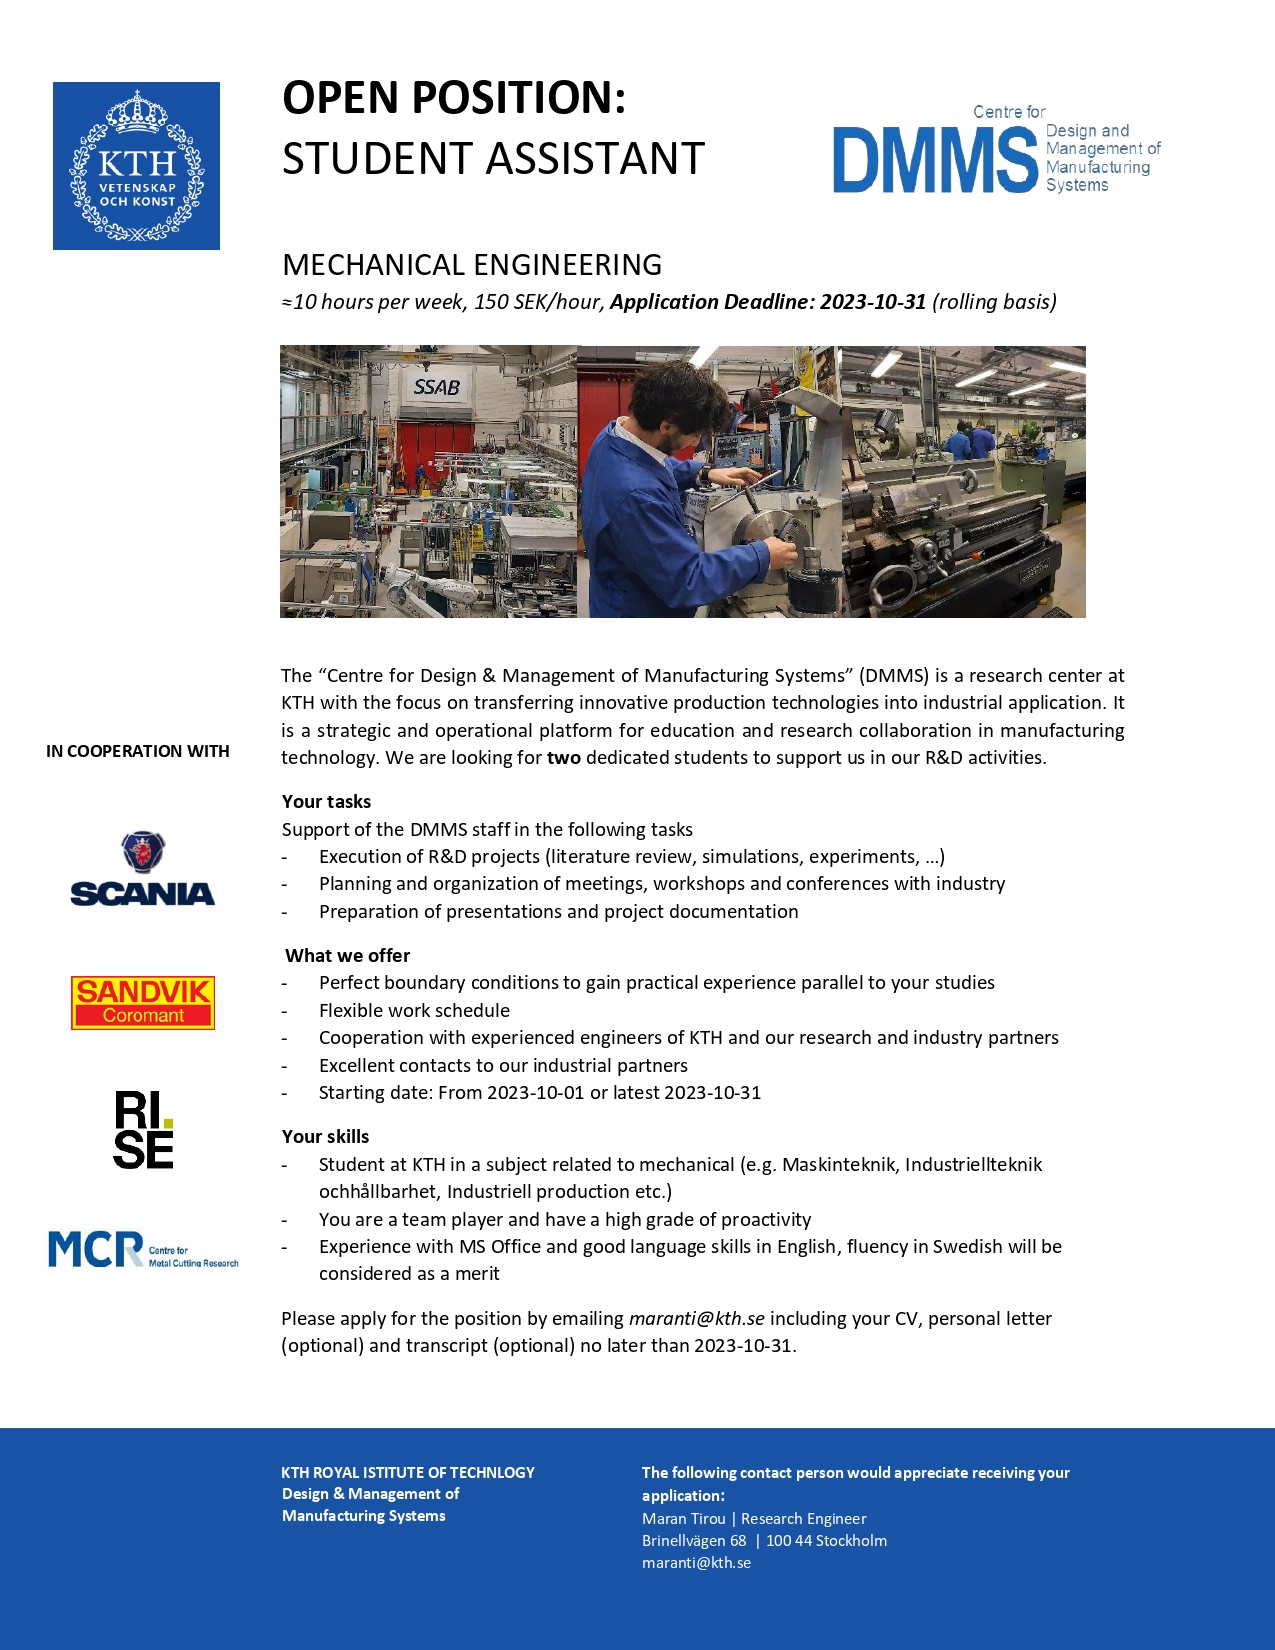 The job poster for the Mechanical Engineering open position